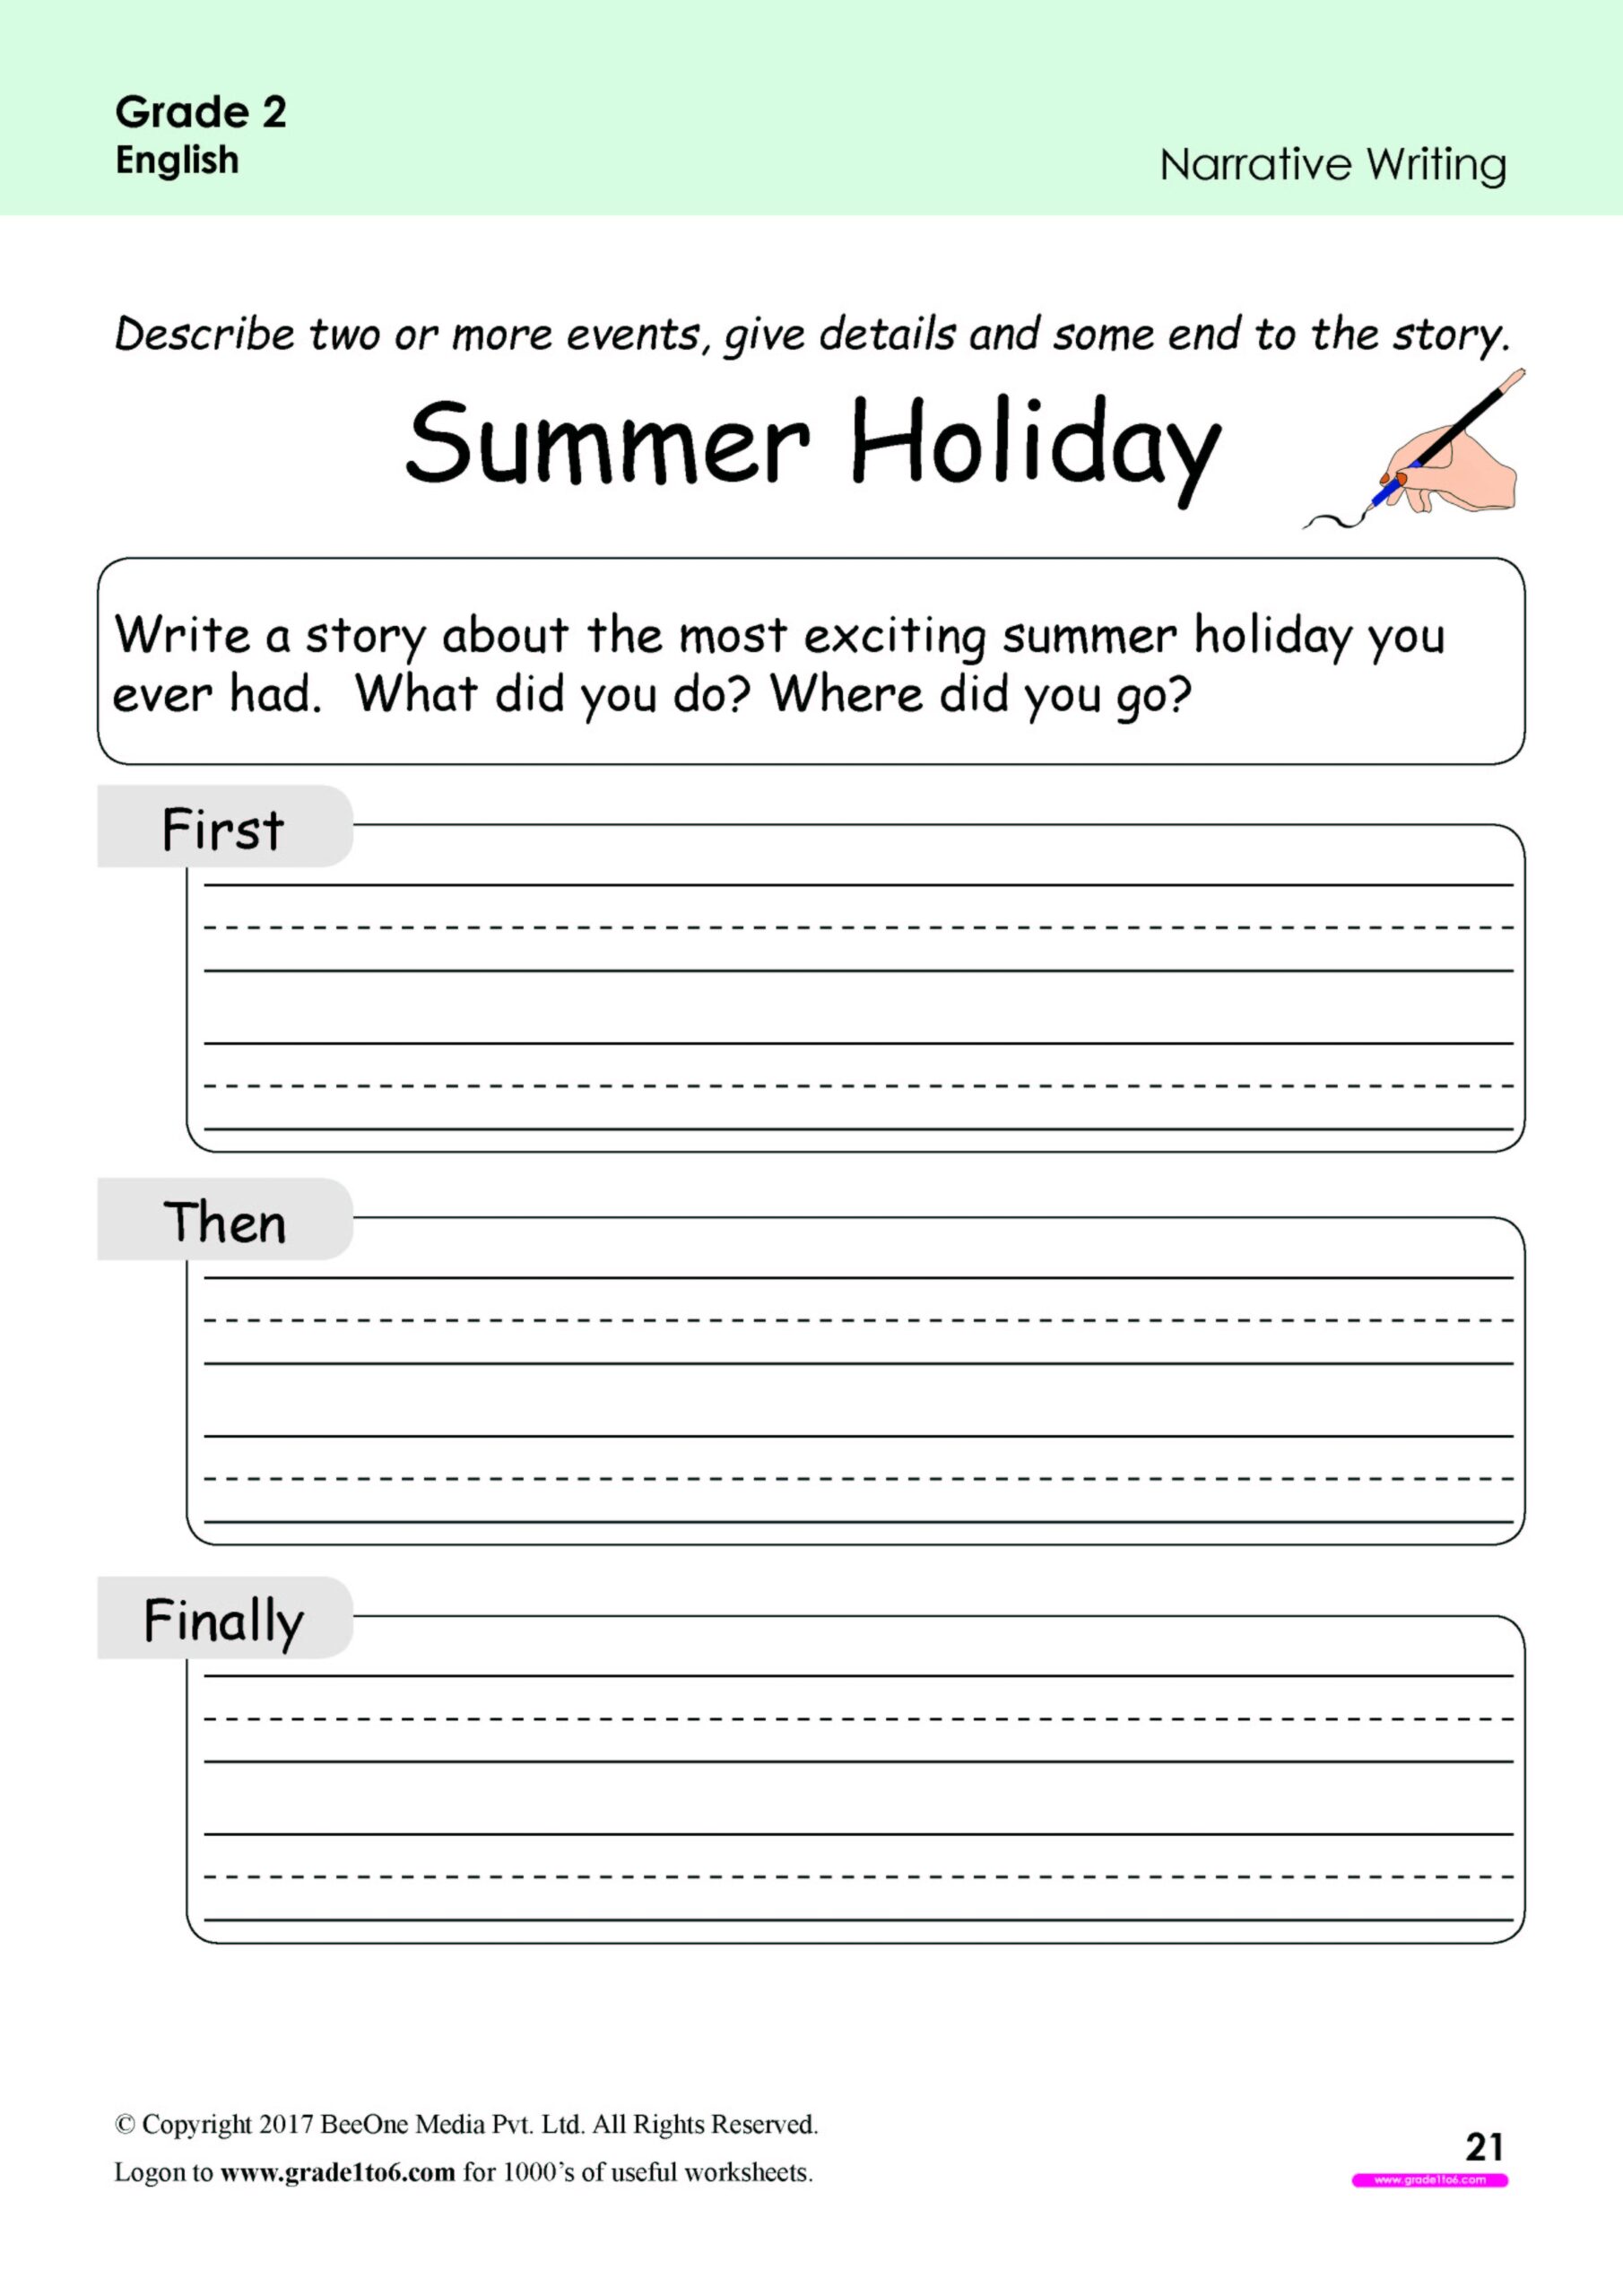 Narrative Writing Worksheets For Grade 2 www grade1to6